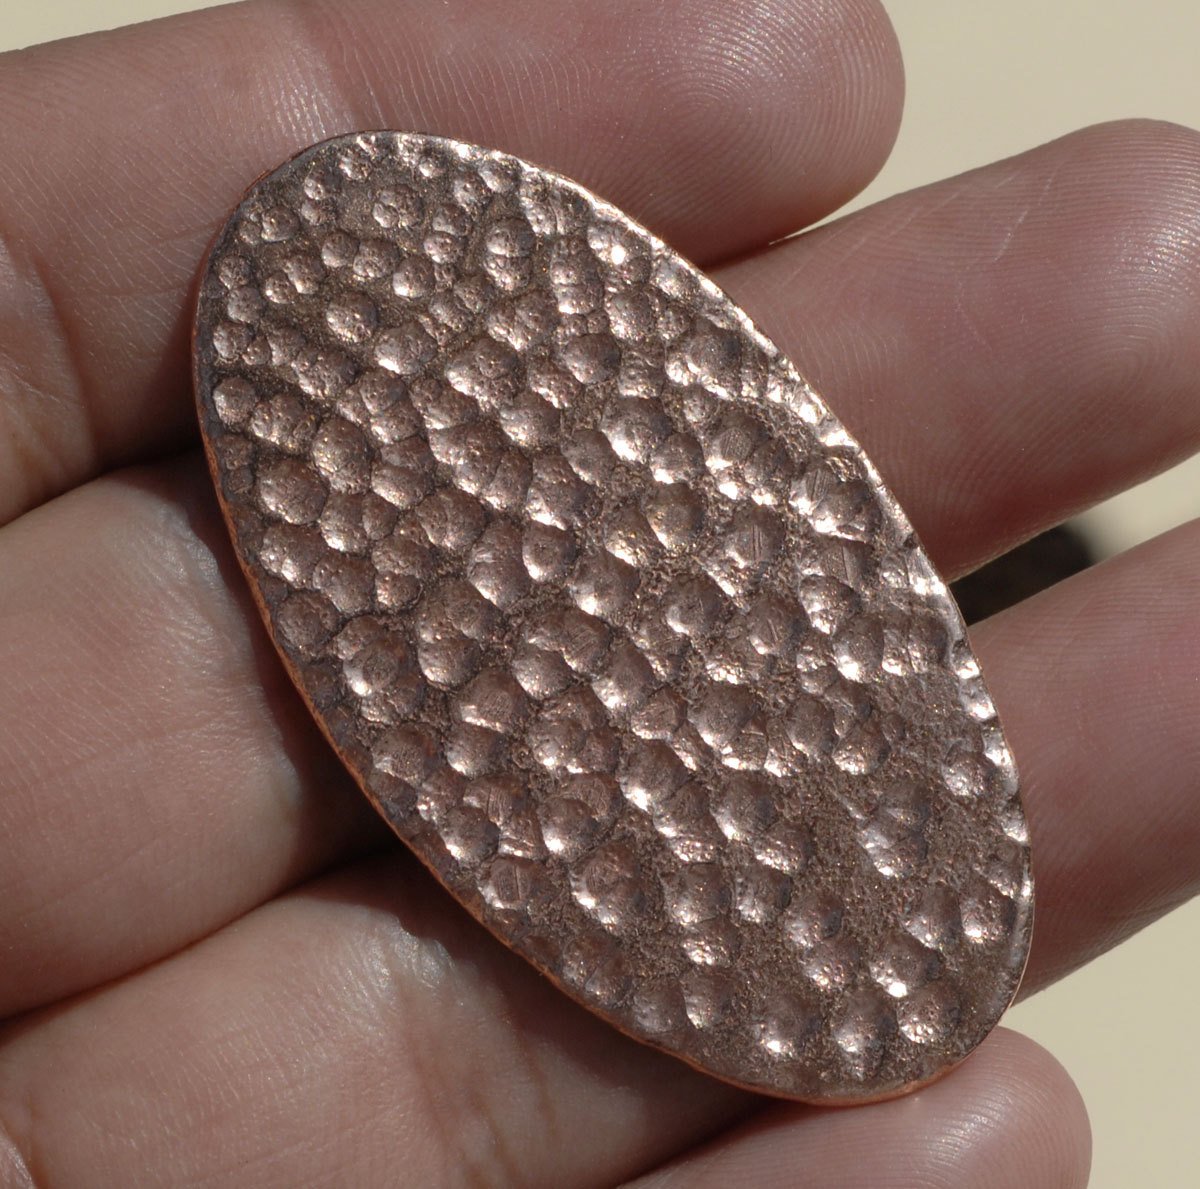 New Gradually Hammered Oval 44mm x 23mm 20g for Blanks Metalworking  Stamping Texturing Blank - Variety of Metals